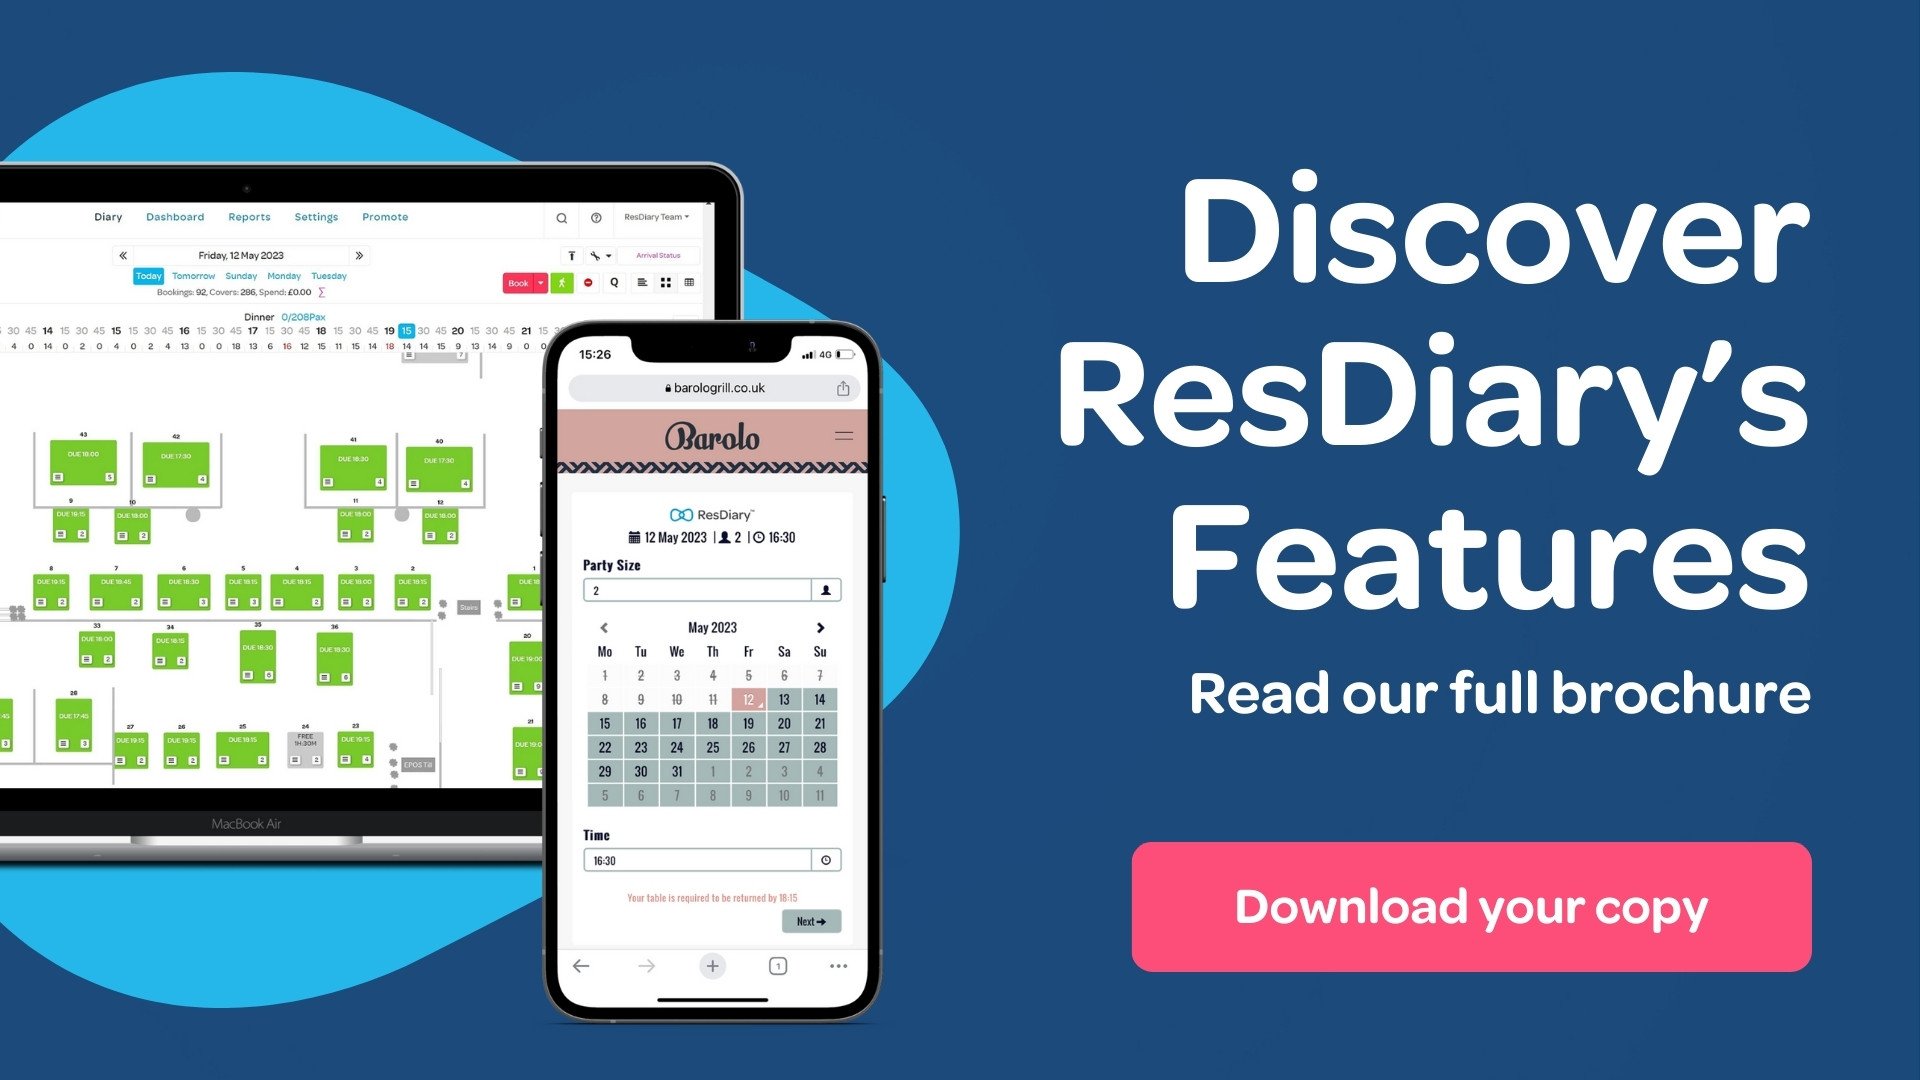 Download the ResDiary Brochure